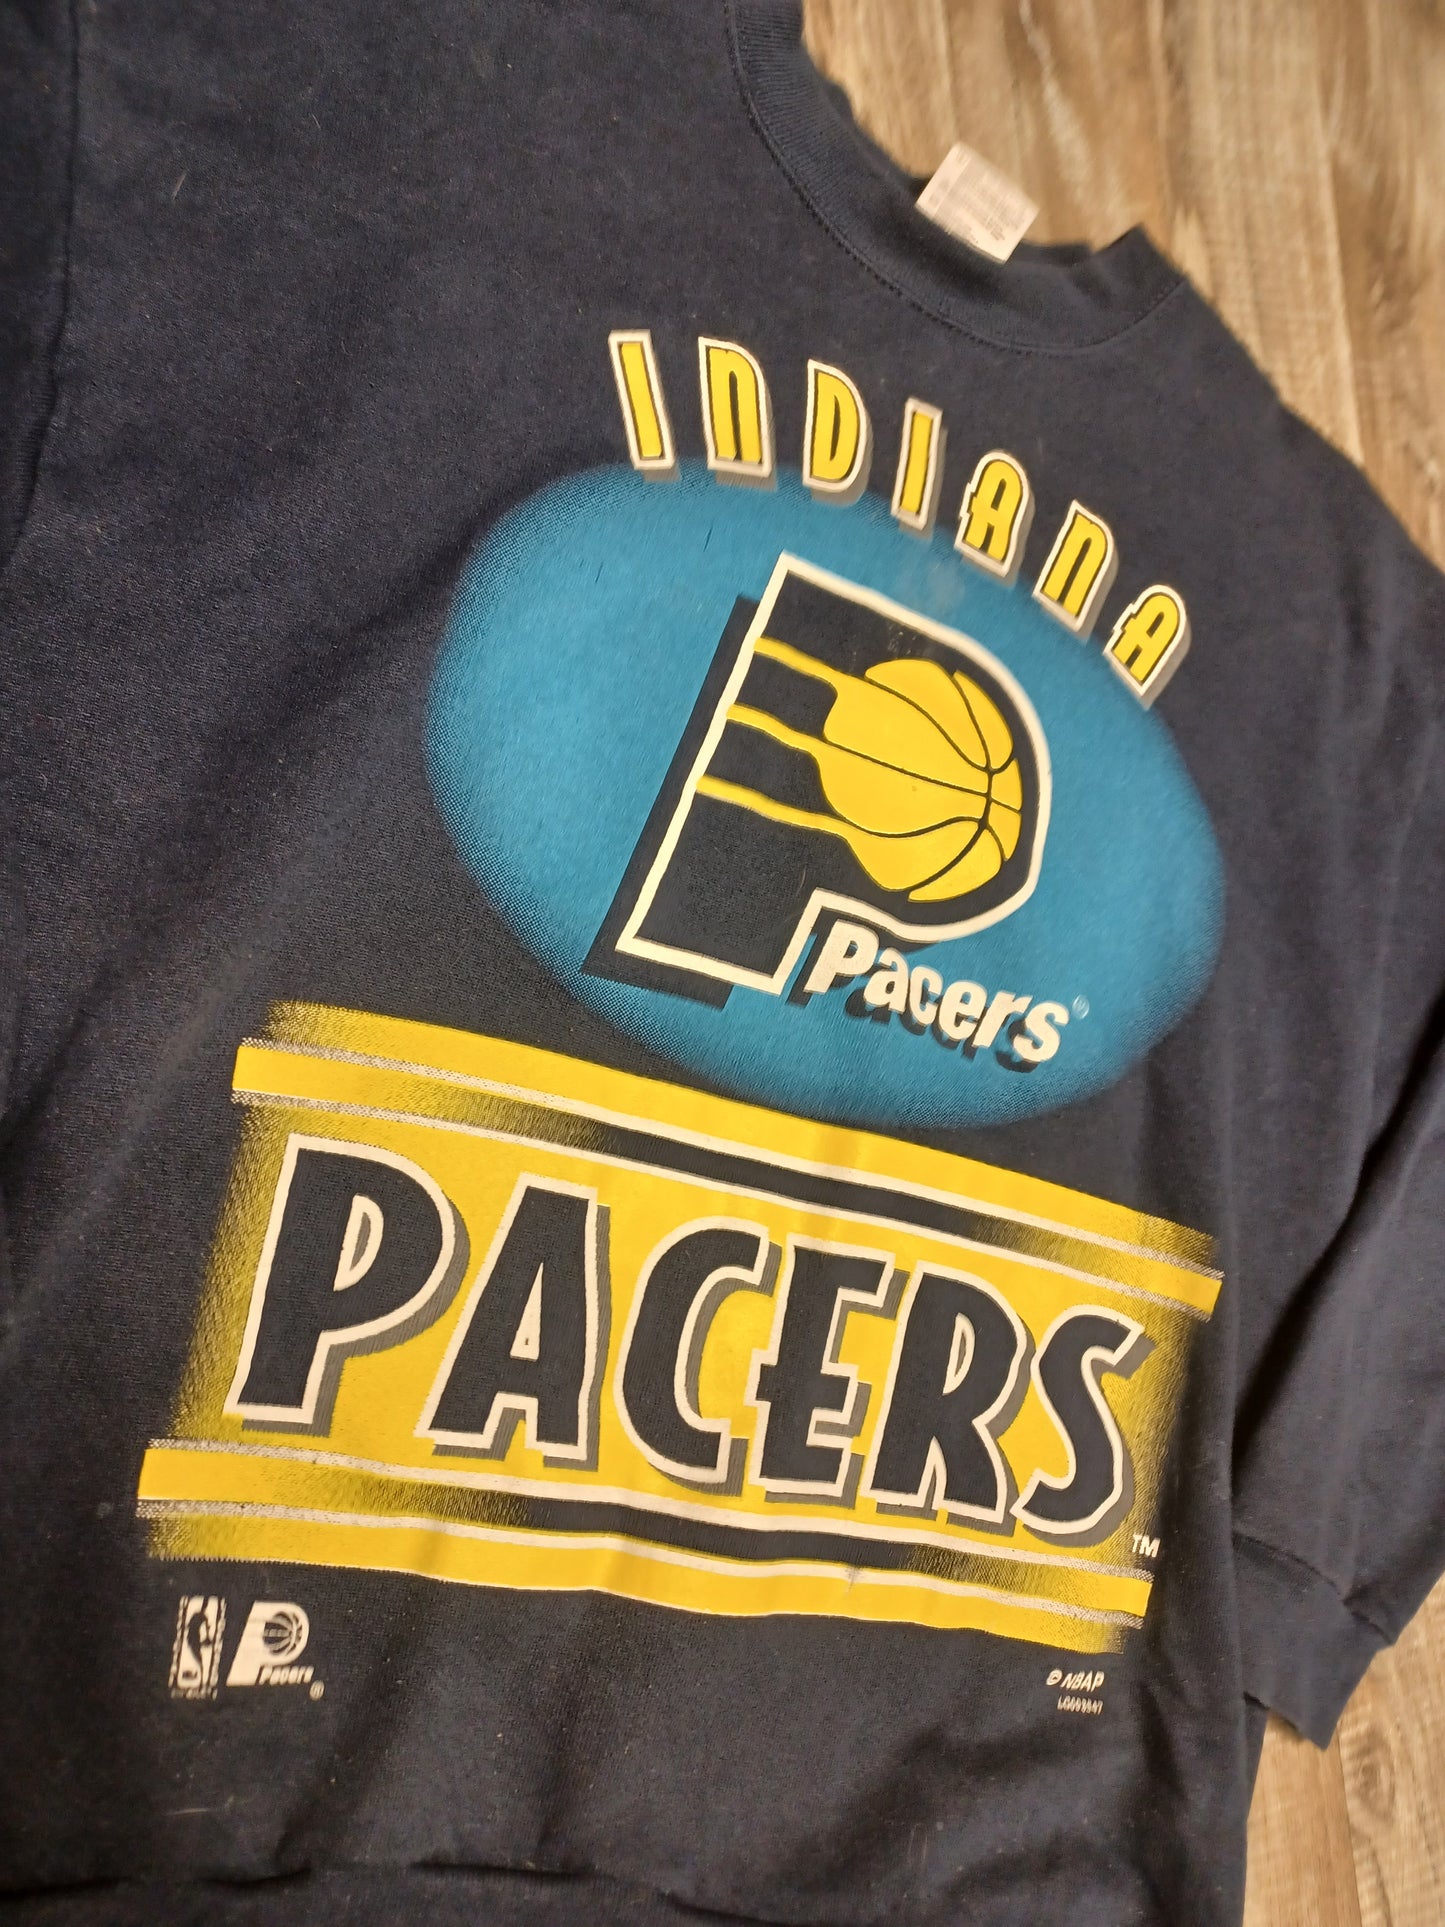 Indiana Pacers Sweater Size Large